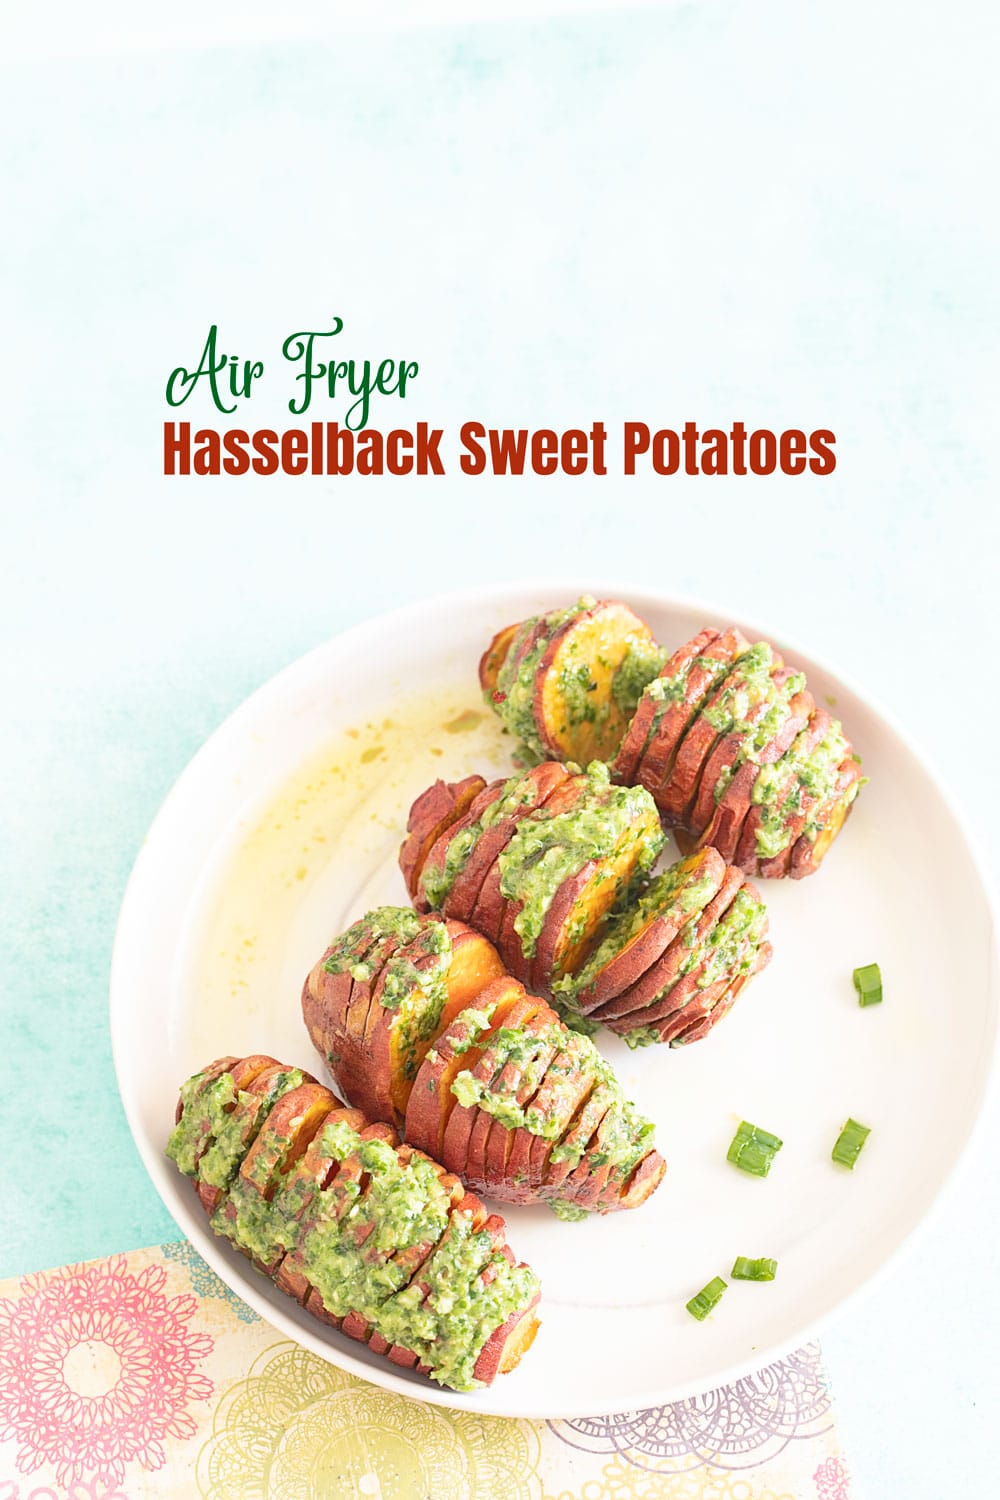 Top view of 4 baby hasselback sweet potatoes with a scallion pesto topping on a white plate